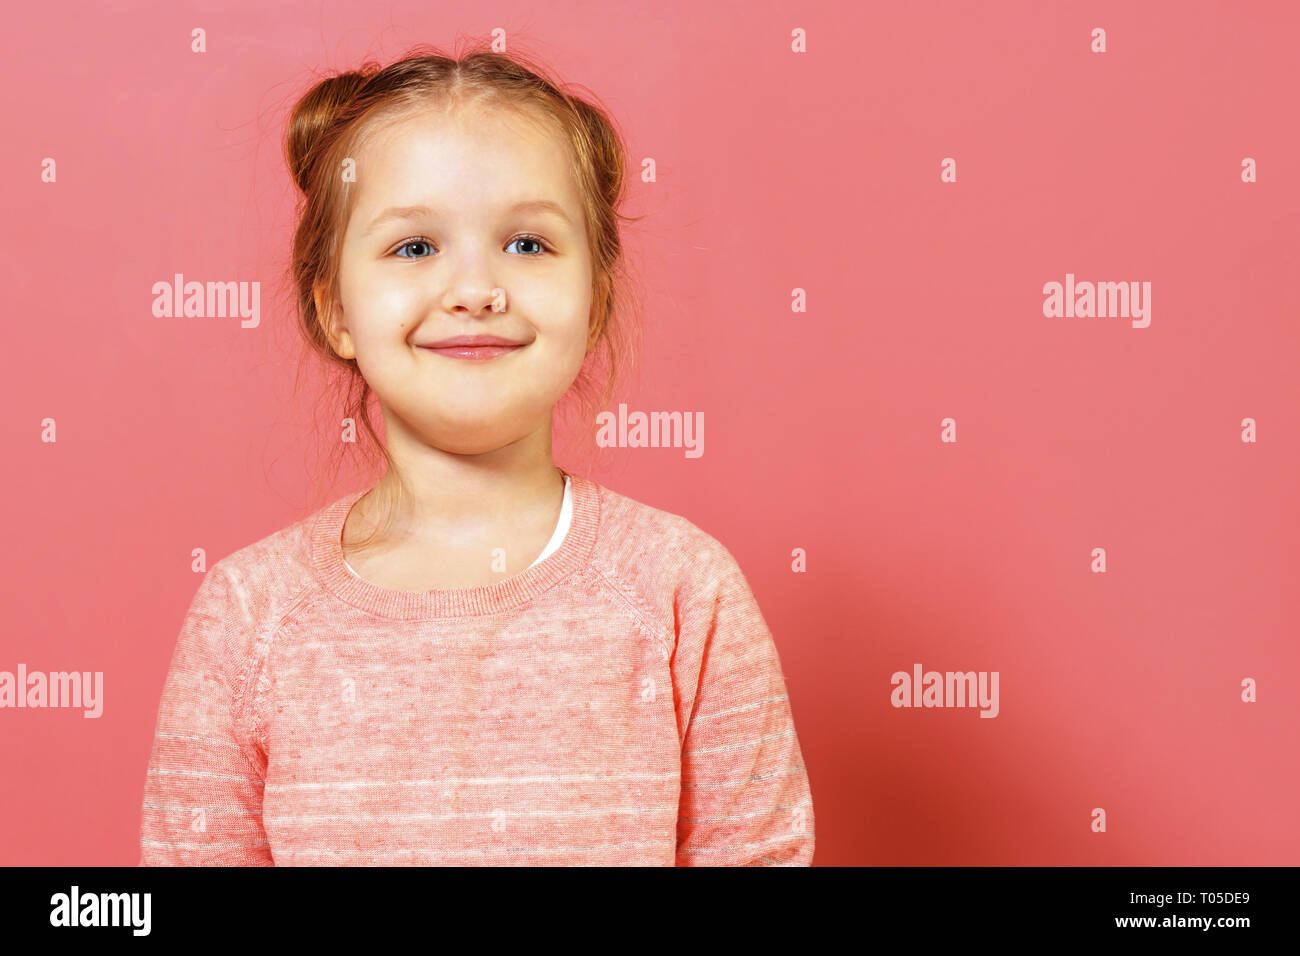 Closeup portrait of cute little child girl with buns of hair over pink background Stock Photo